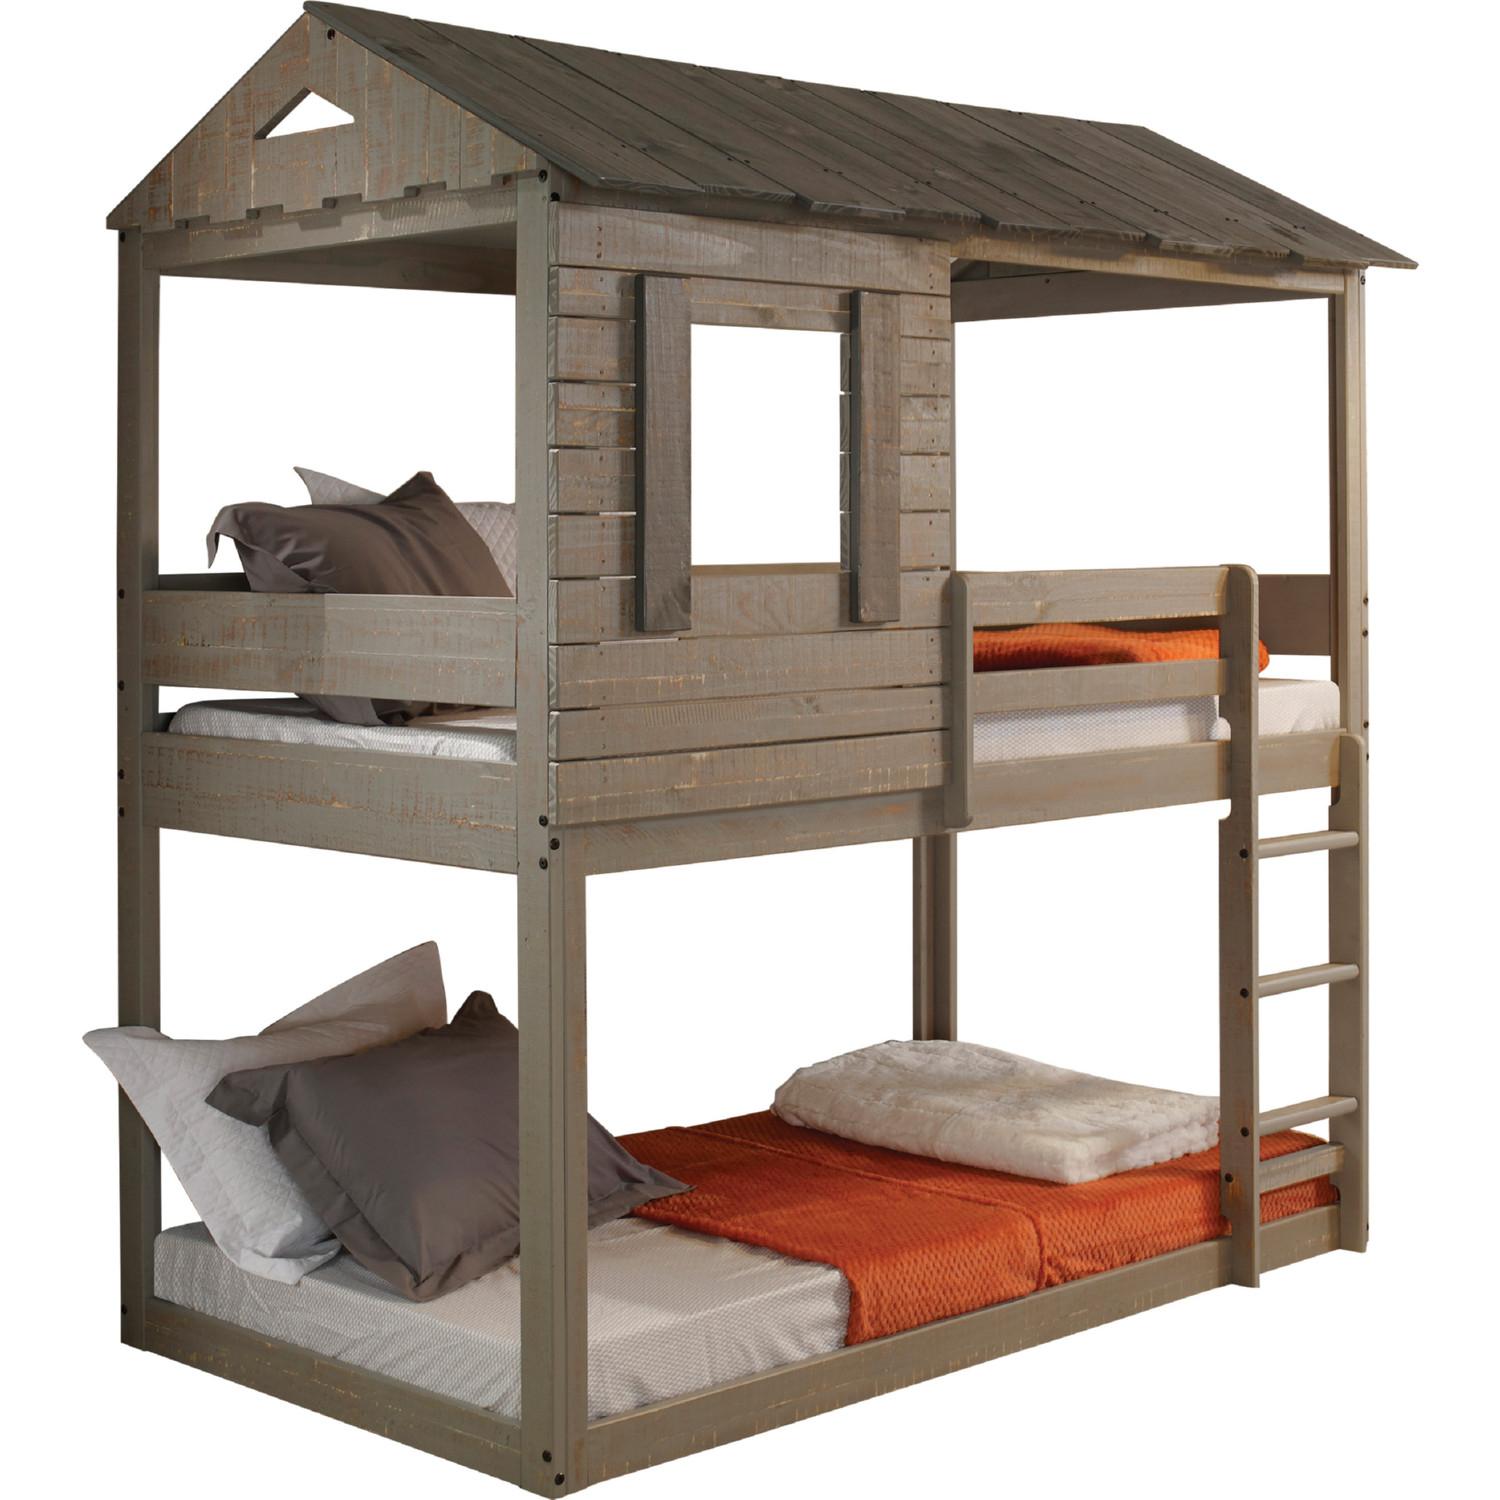 Transitional, Cottage Twin/Twin Bunk Bed Darlene 38140 in Gray 